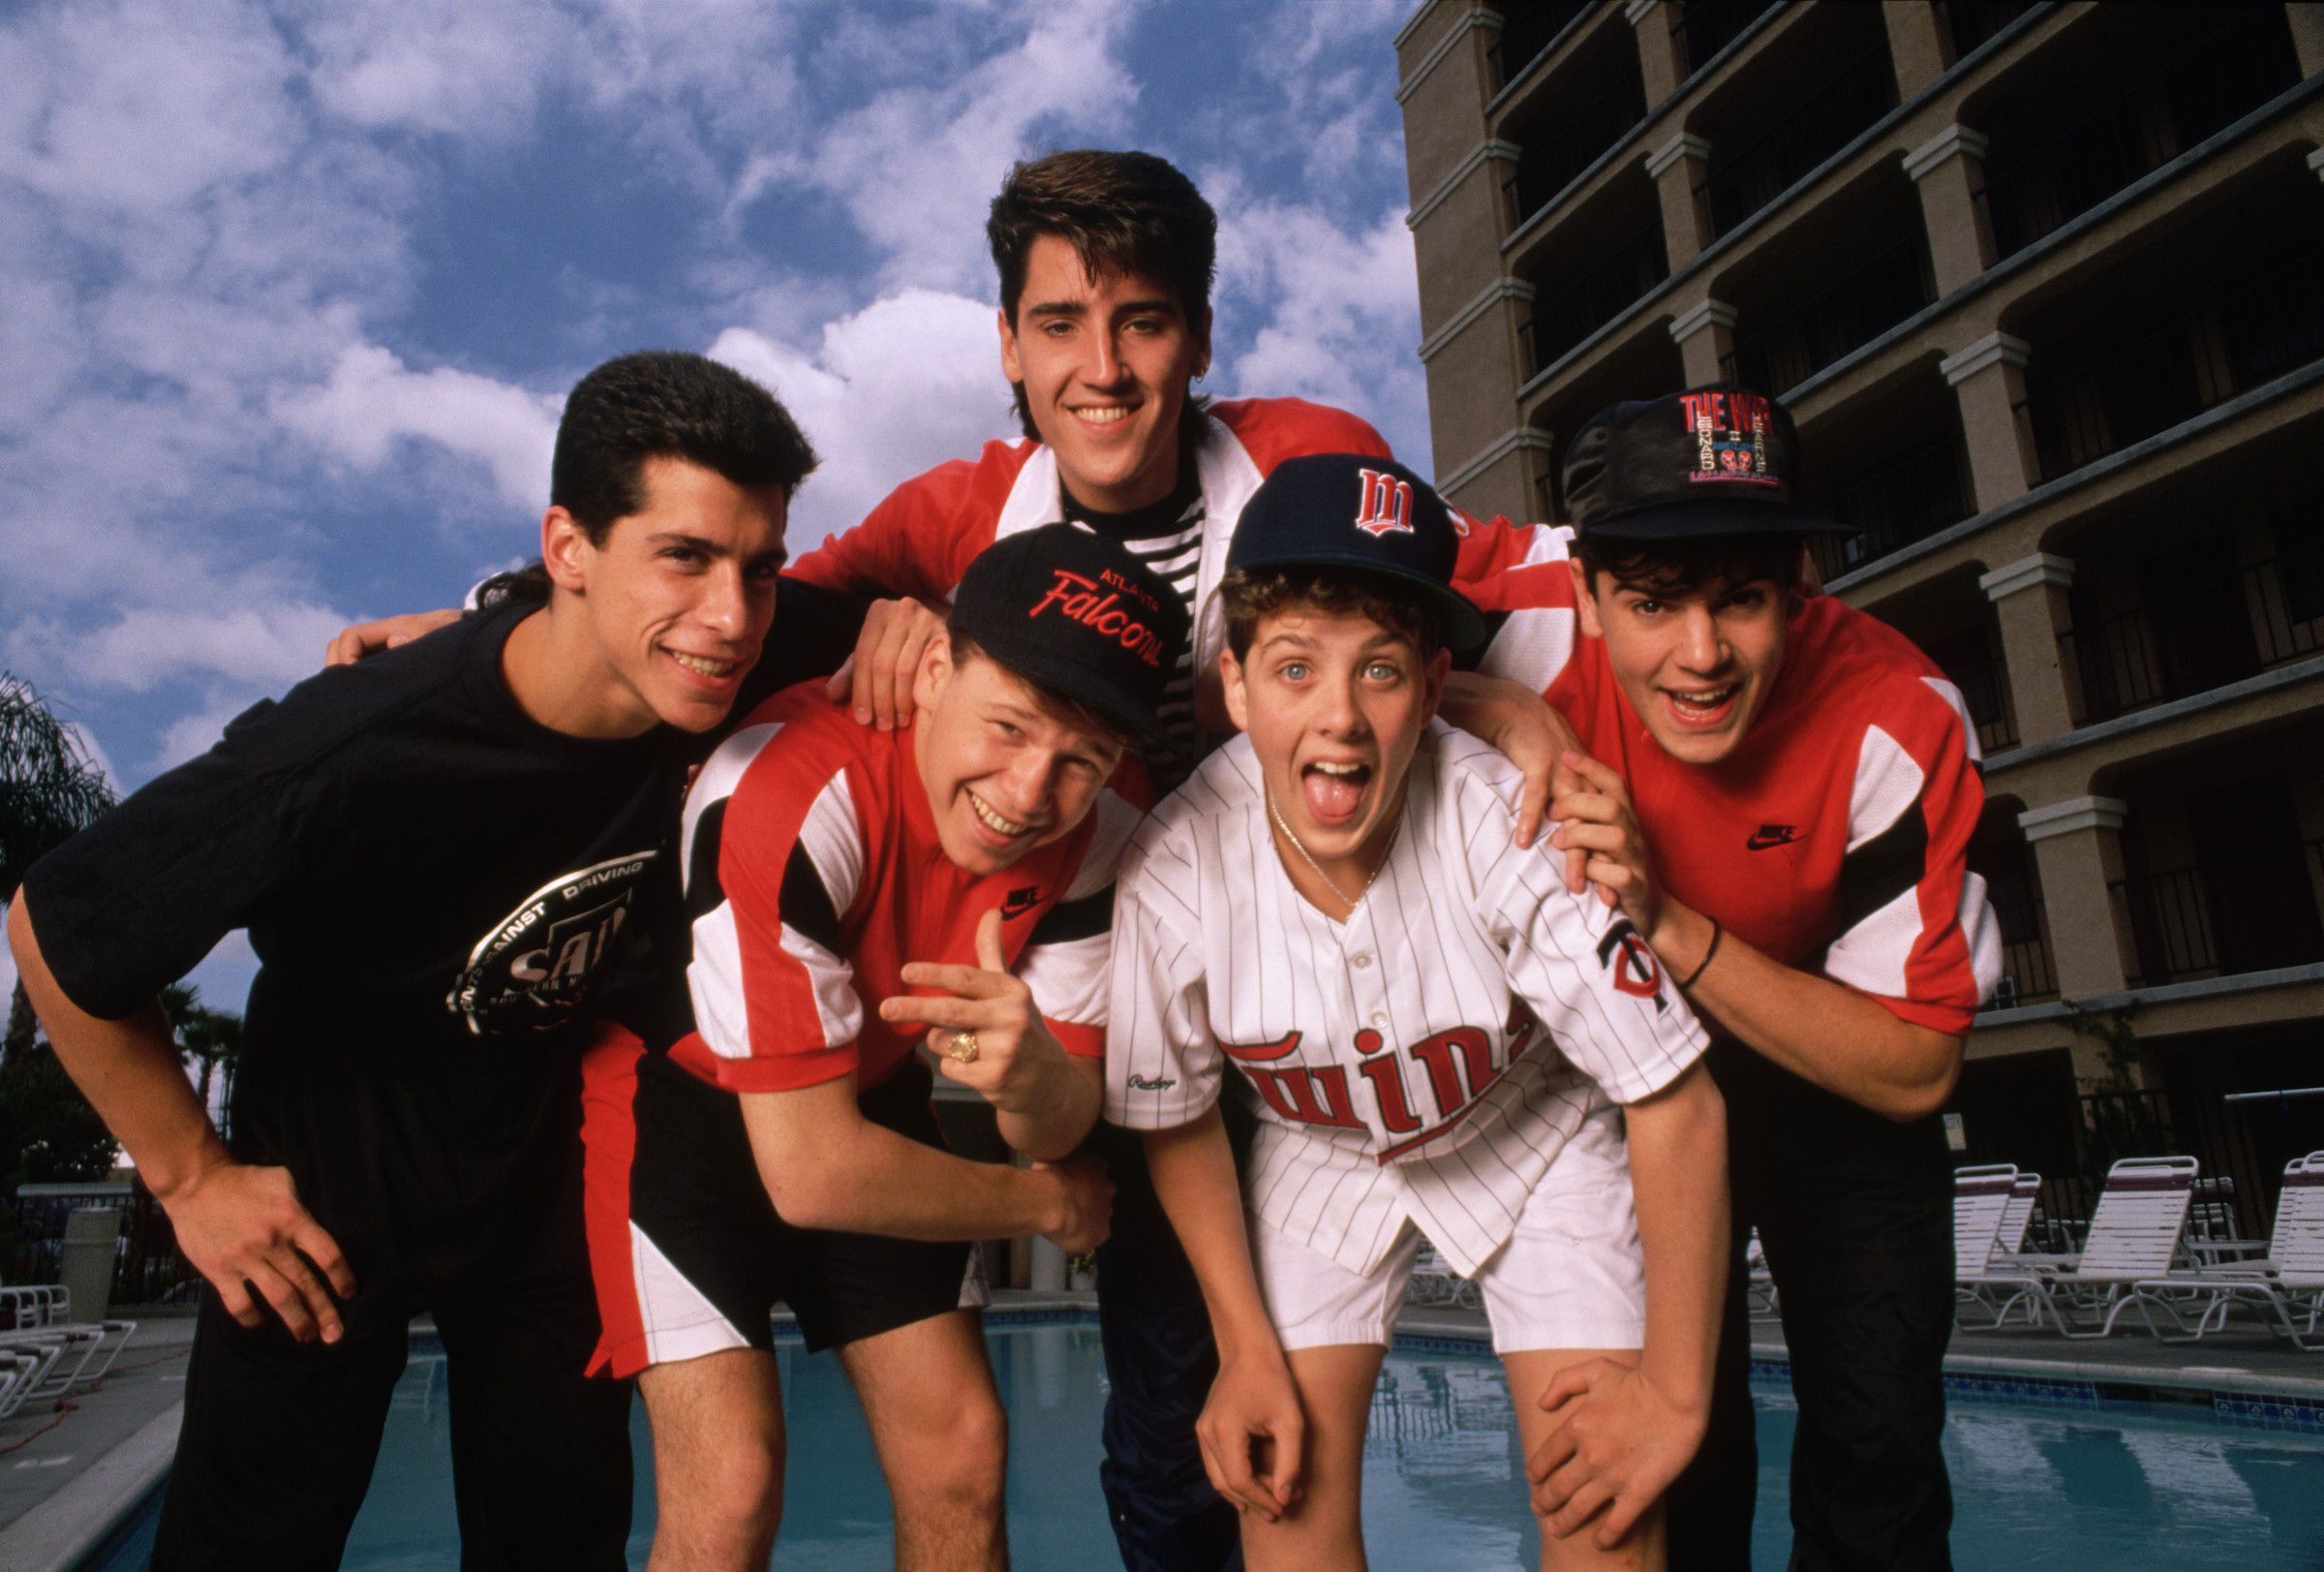 New Kids On The Block You Remember?